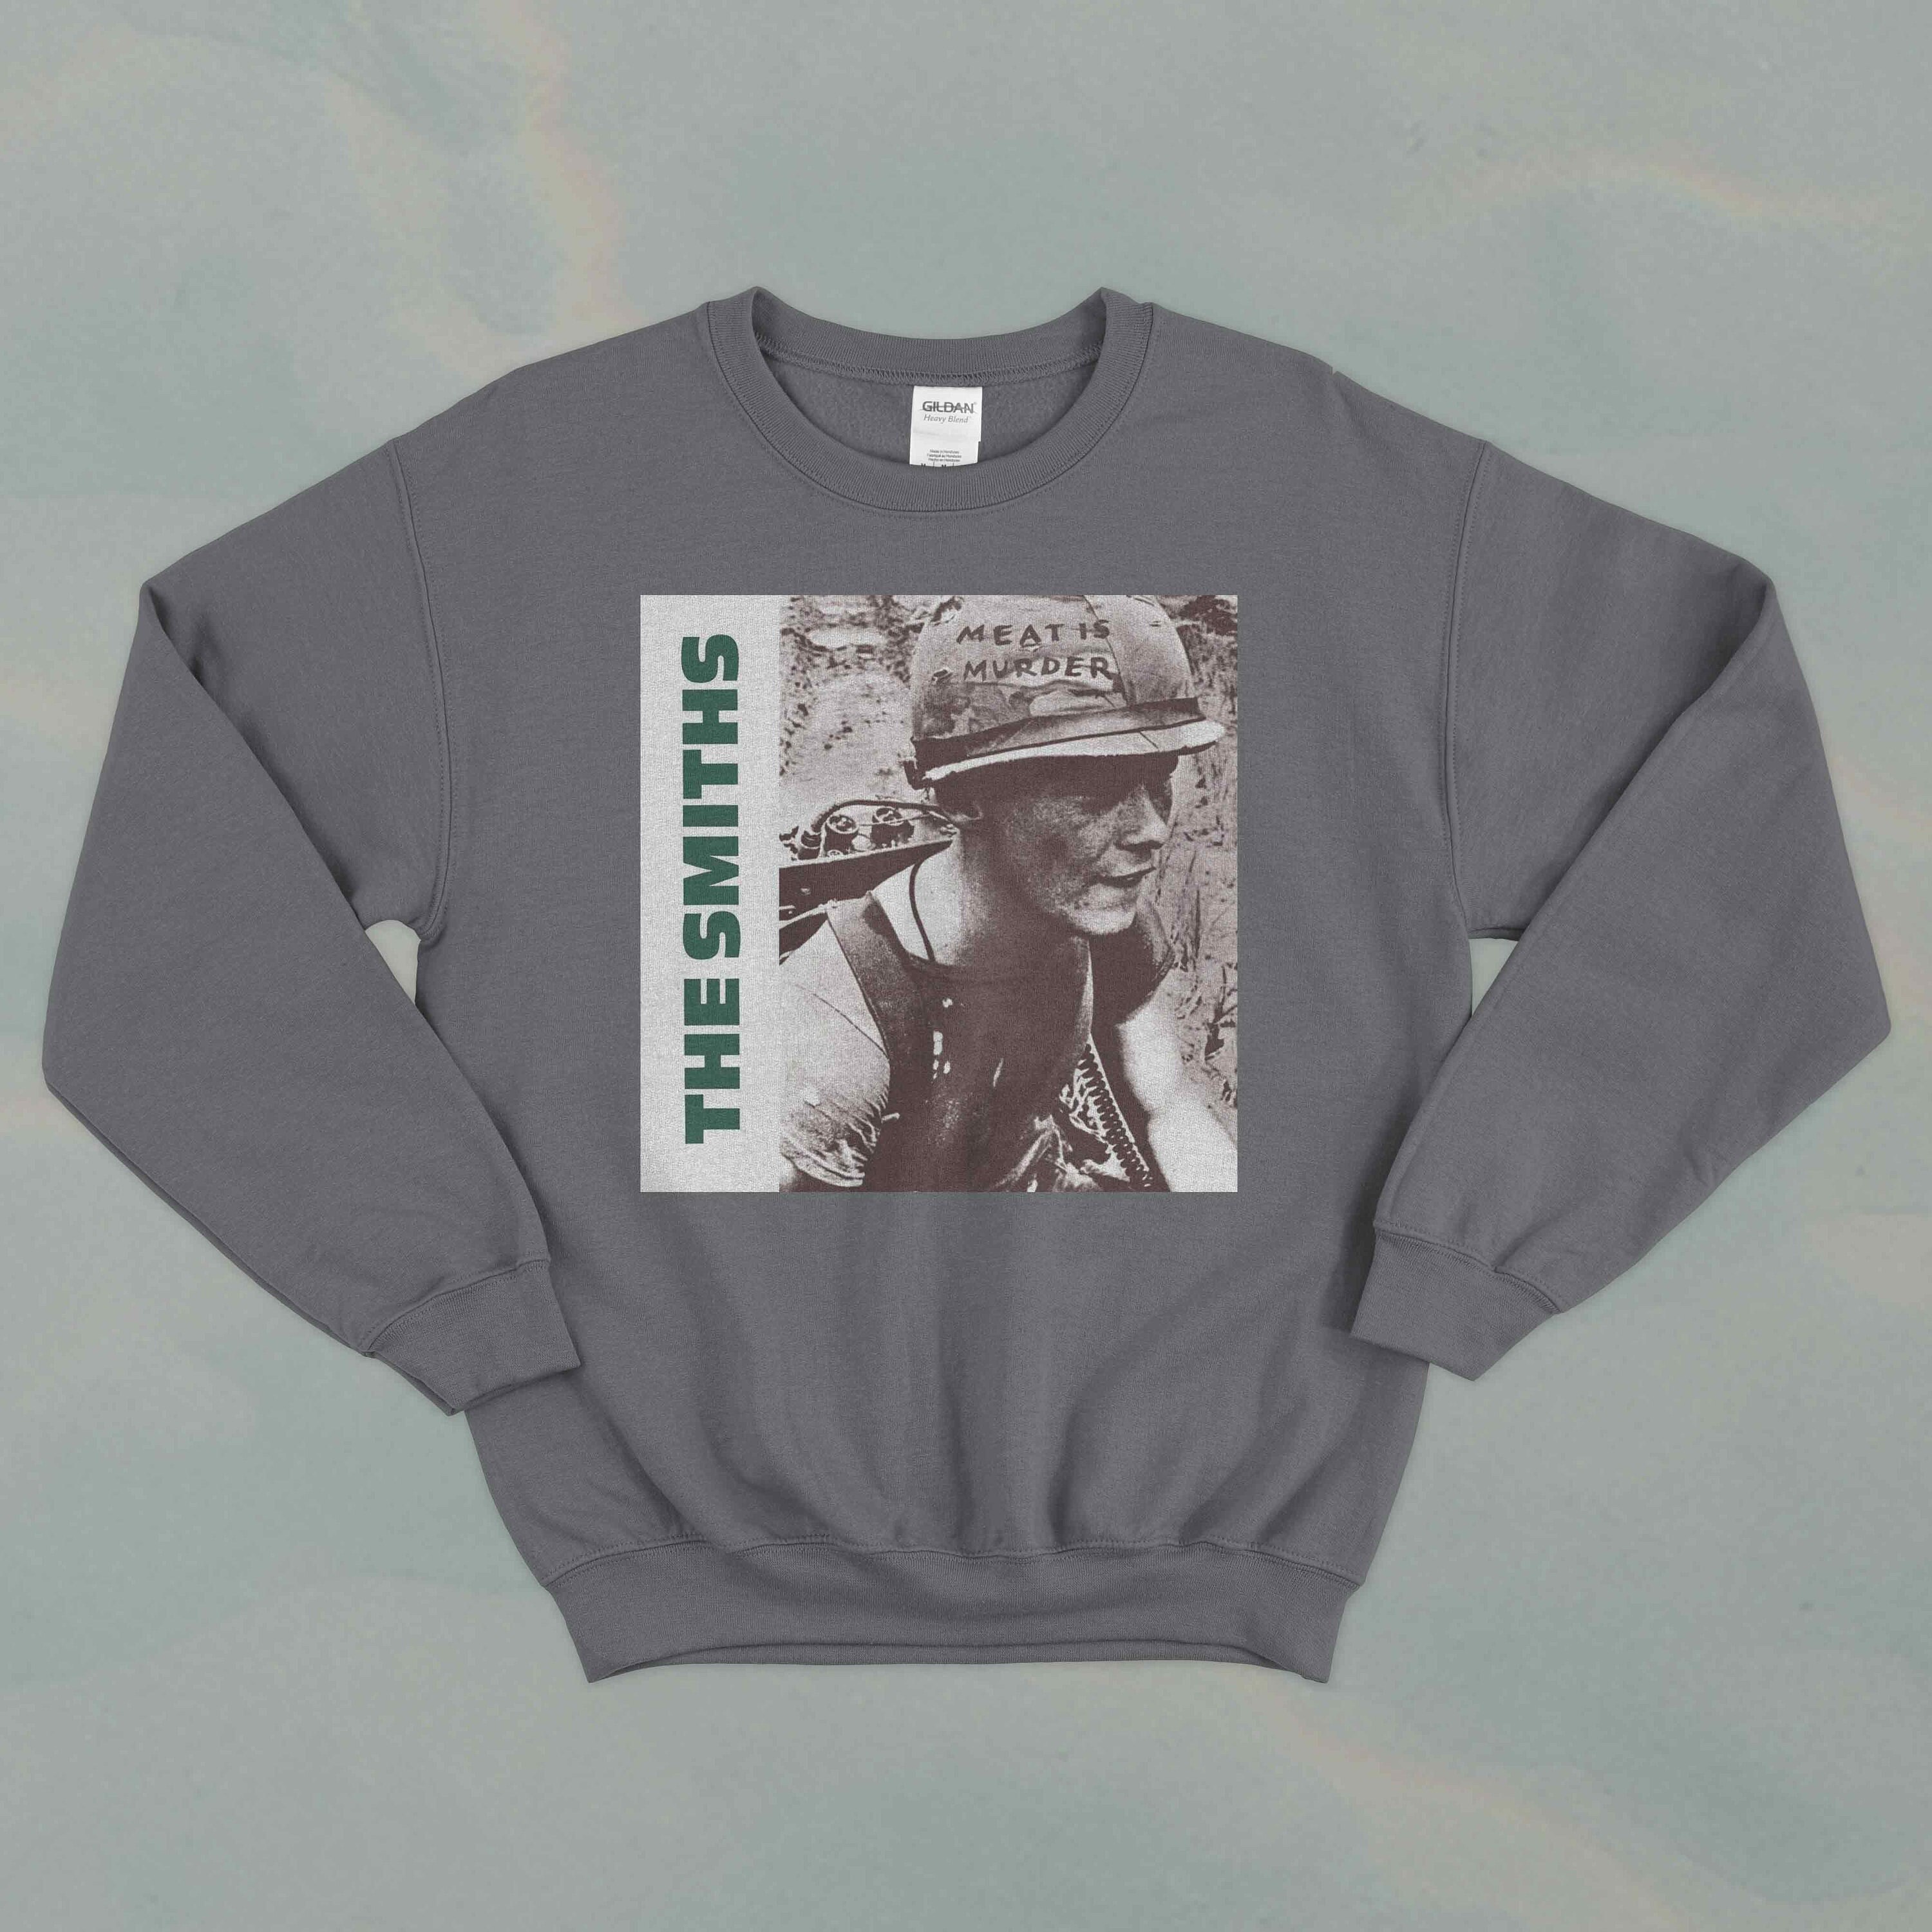 Discover The Smiths 'Meat is Murder' Sweatshirt